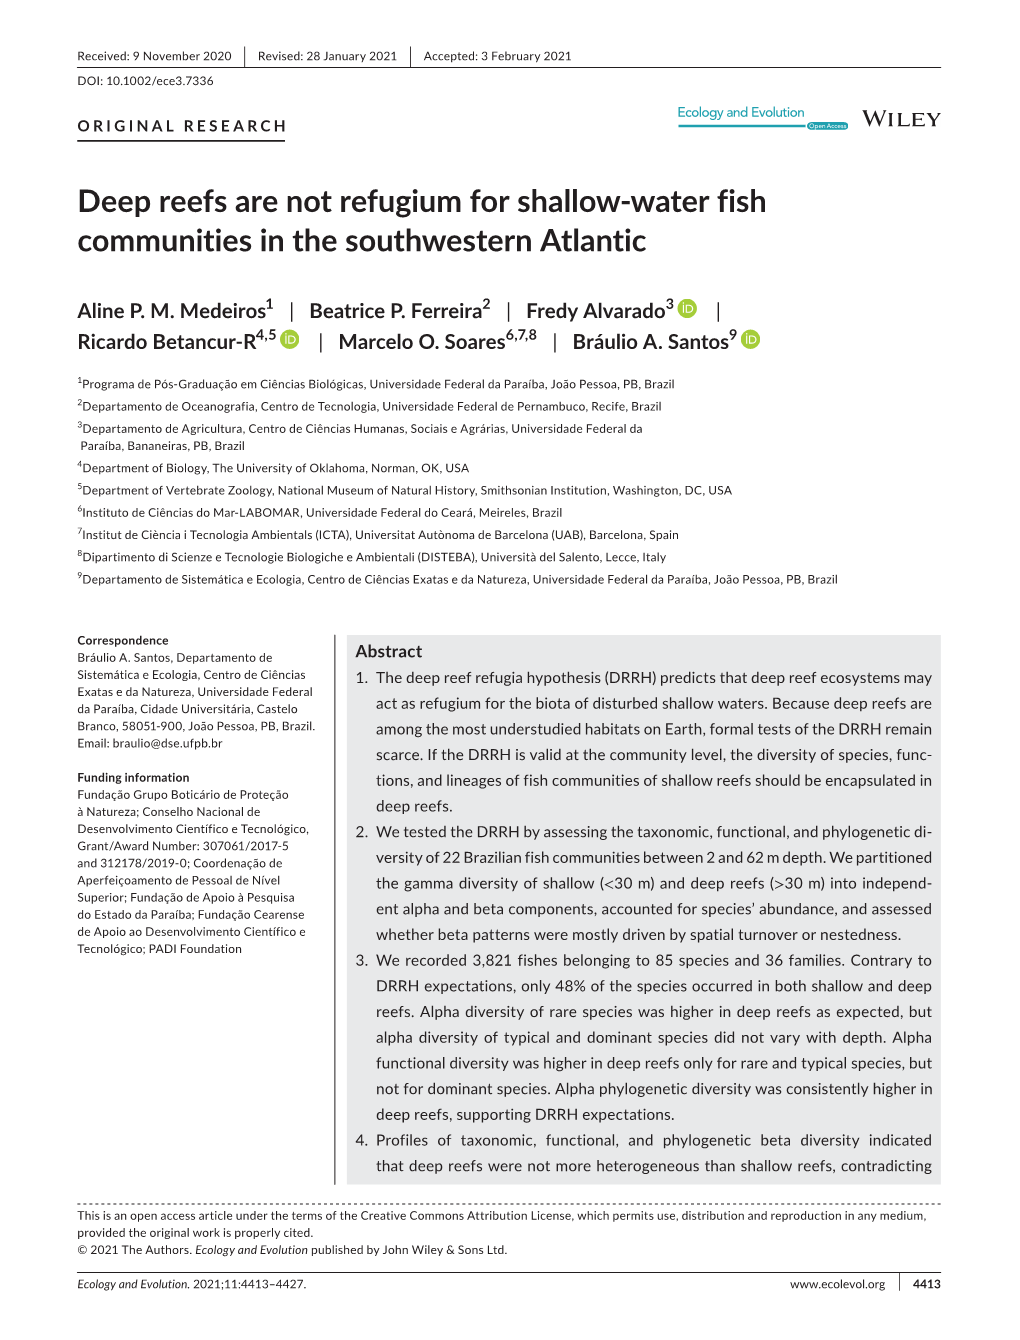 Deep Reefs Are Not Refugium for Shallow&#X02010;Water